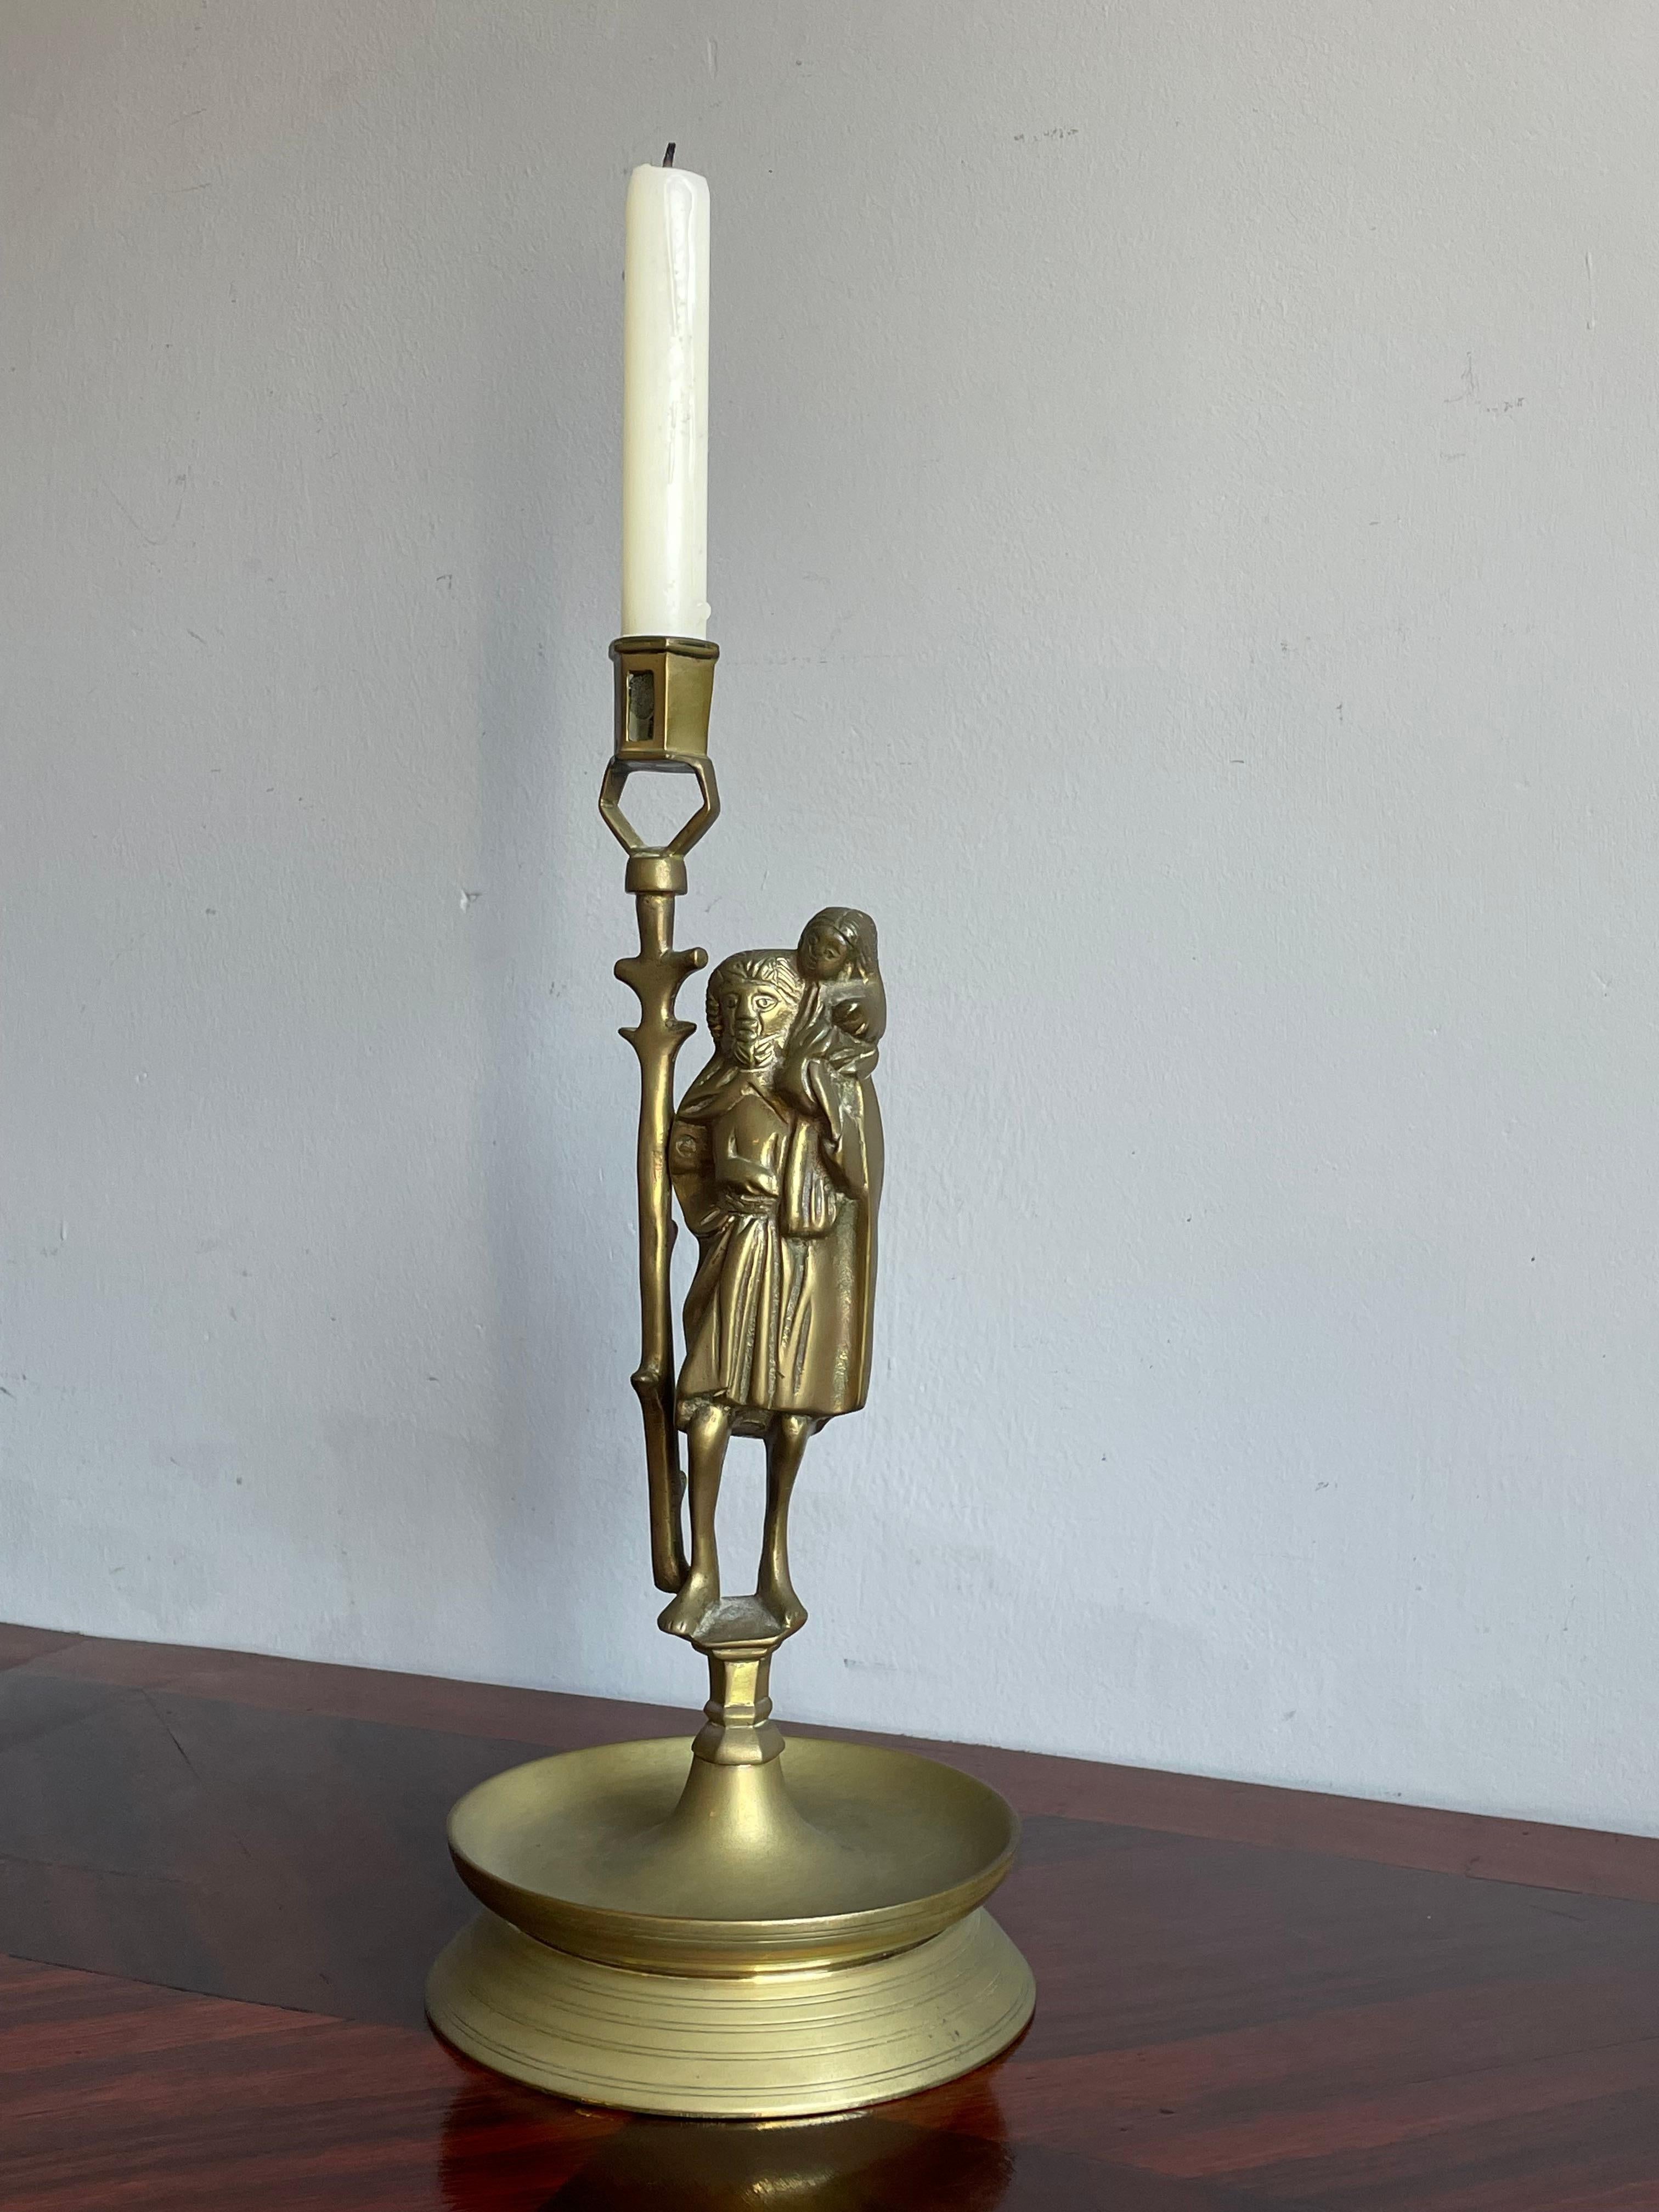 Medieval Style candlestick.

For the collectors and enthousiasts of the Gothic Style in general and of Saint Christopher in particular we also have this rare Medieval Style table candle holder. Although we had never owned or seen one before, we